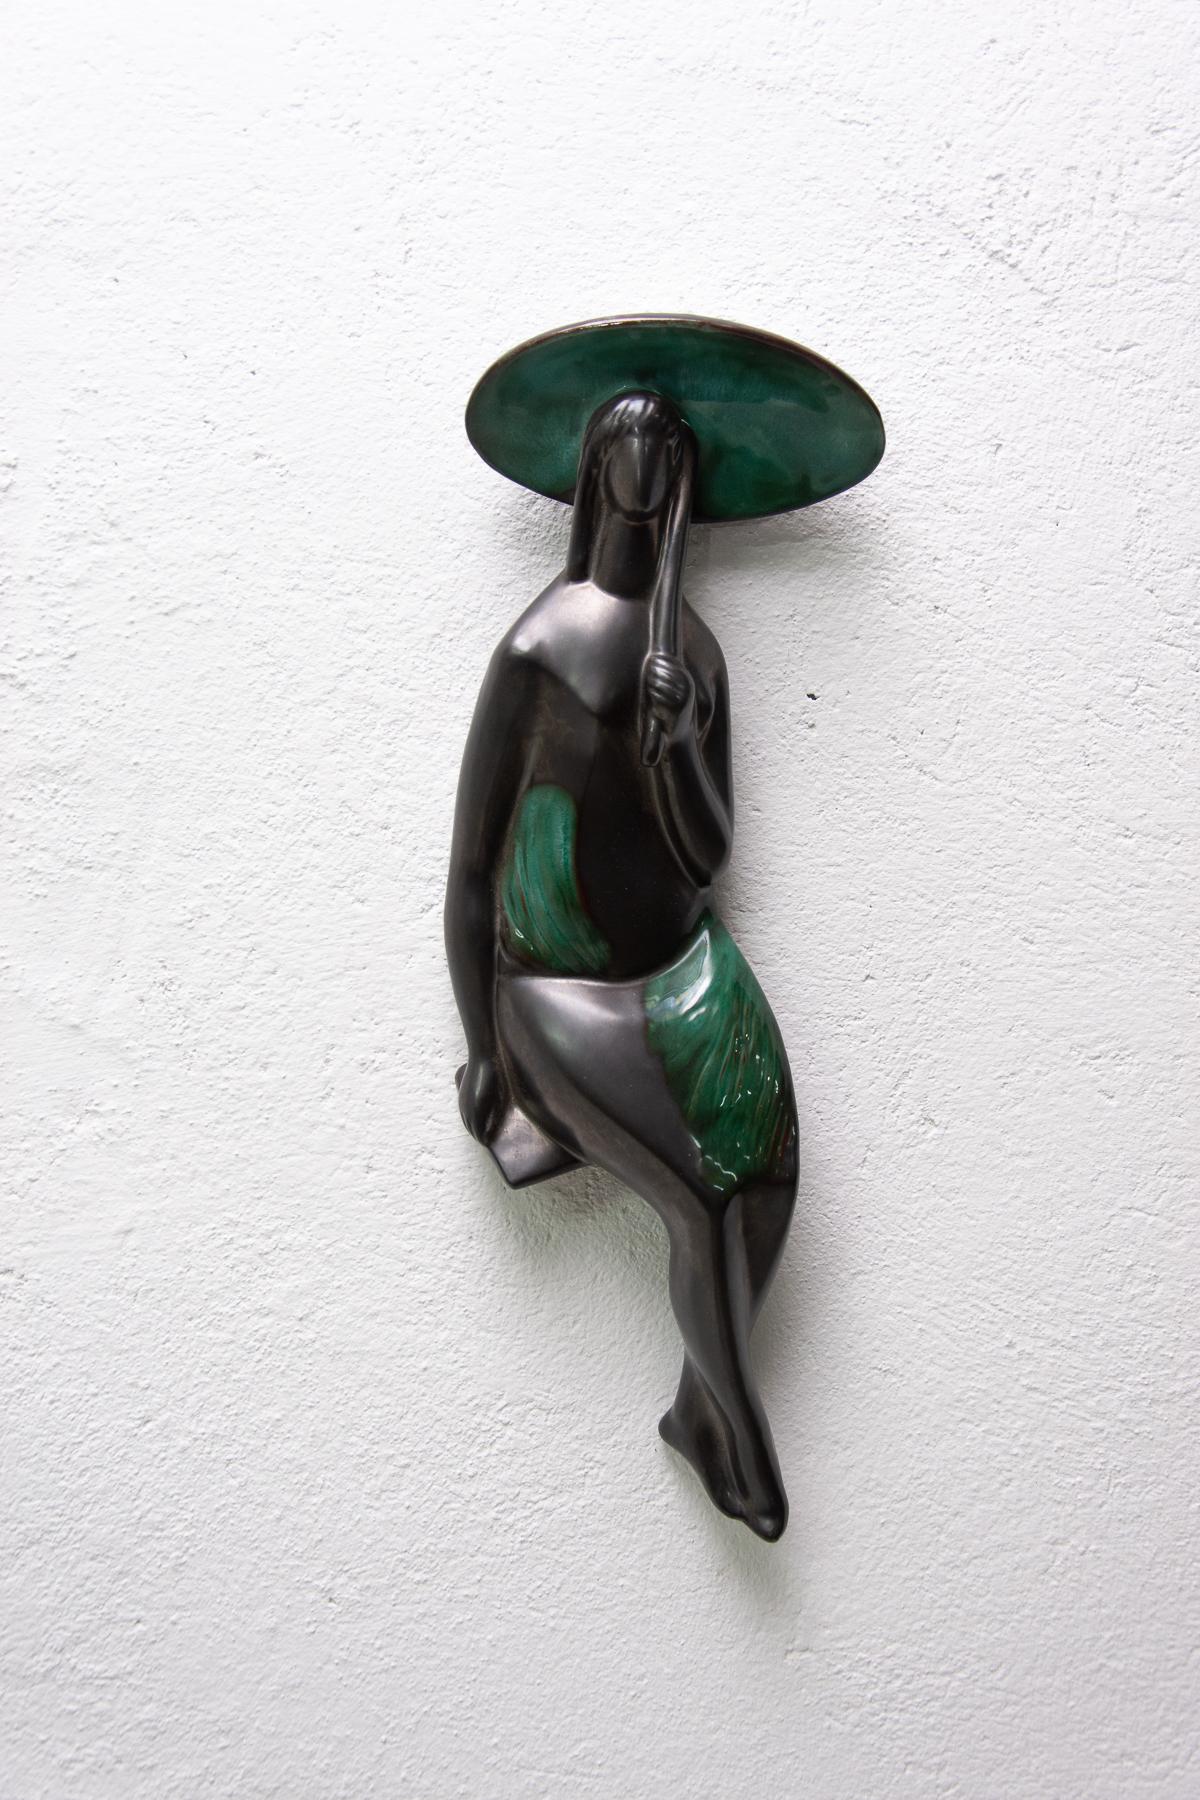 Ceramic hanging sculpture Girls with a parasol designed by Czechoslovak artist Jitka Forejtová. Made in 1960s. The sculpture is made of ceramics with green-black glaze. There is a hole for hanging from behind.
This minimalist design of the